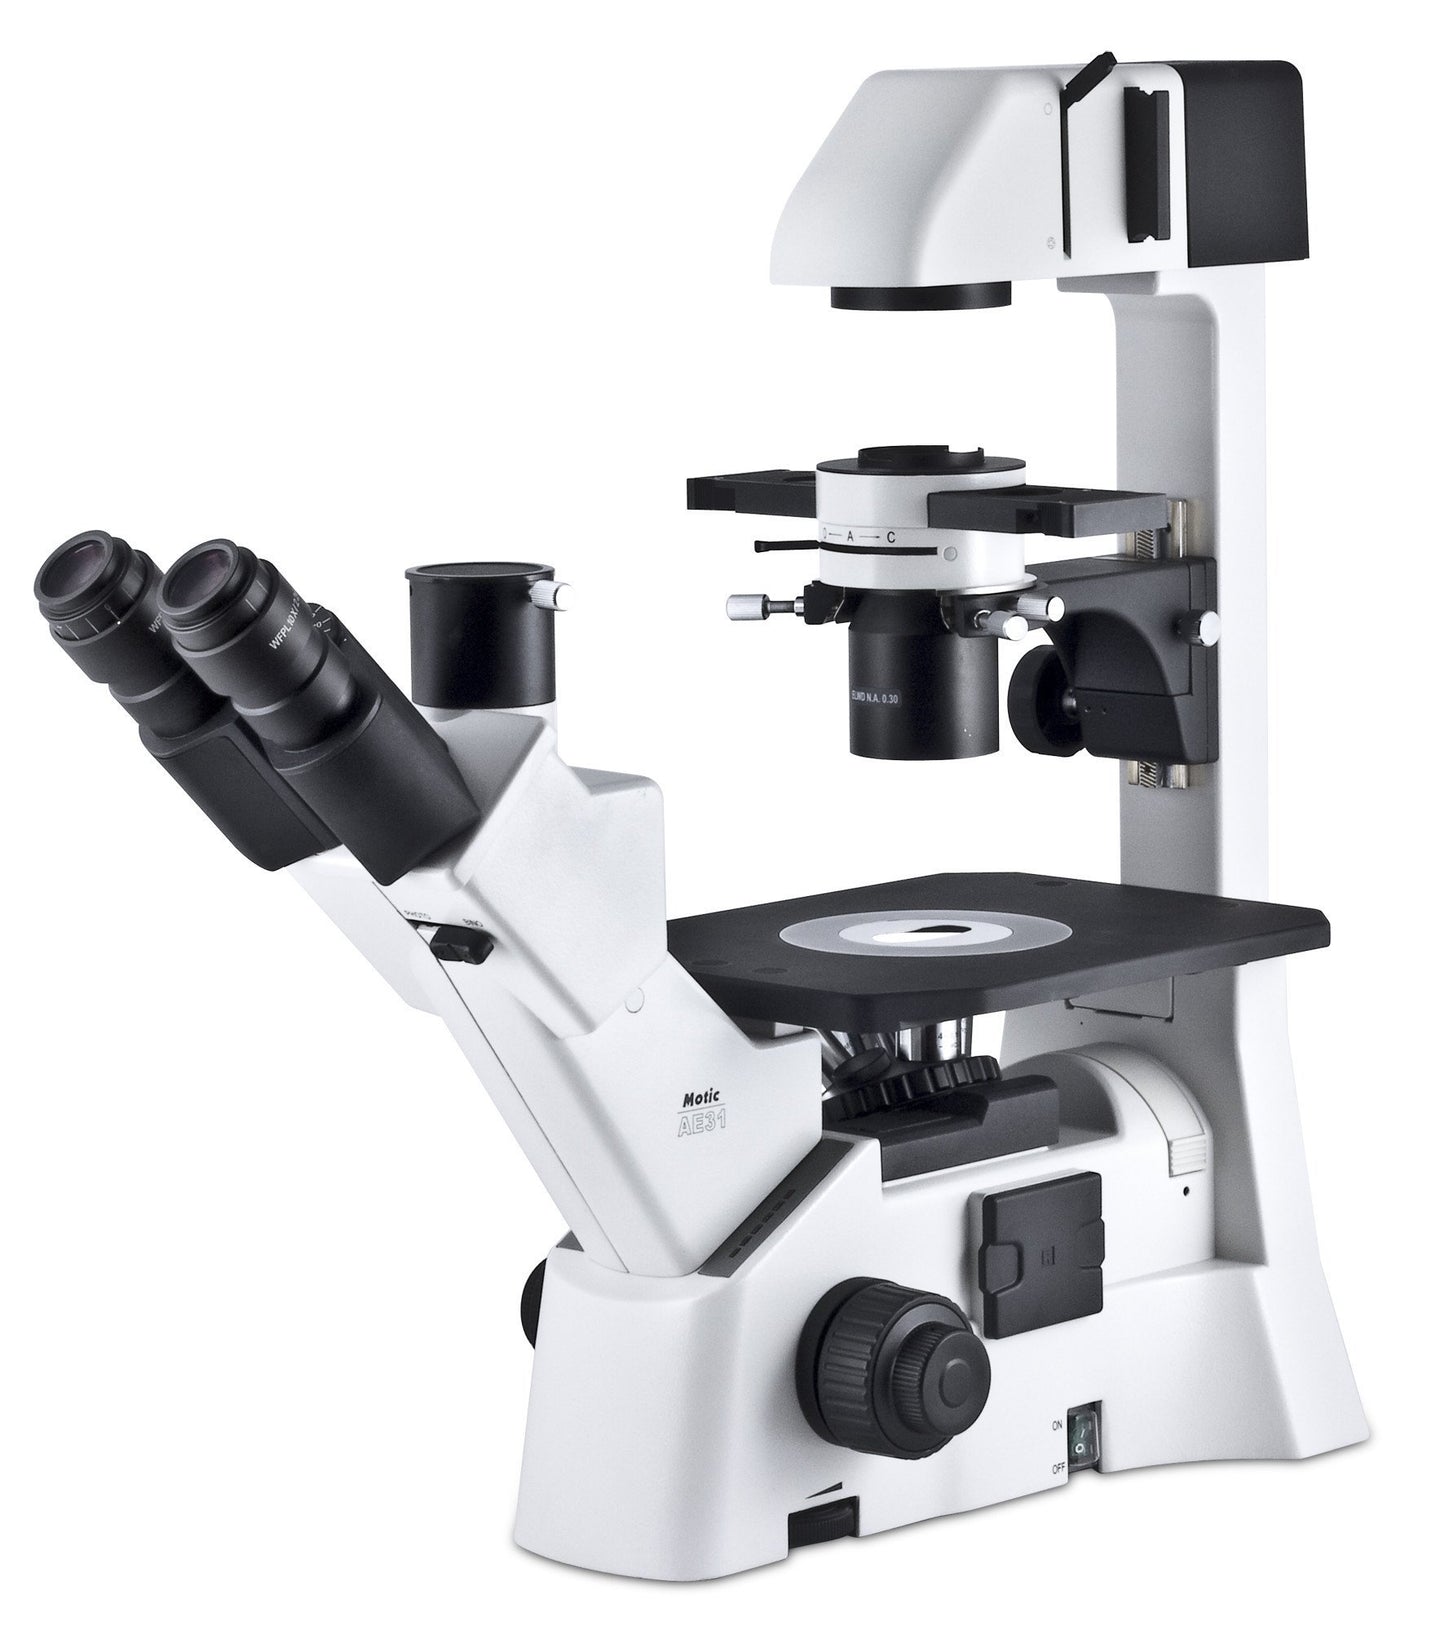 Motic AE31 Phase Contrast Inverted Microscope Series - Microscope Central
 - 2